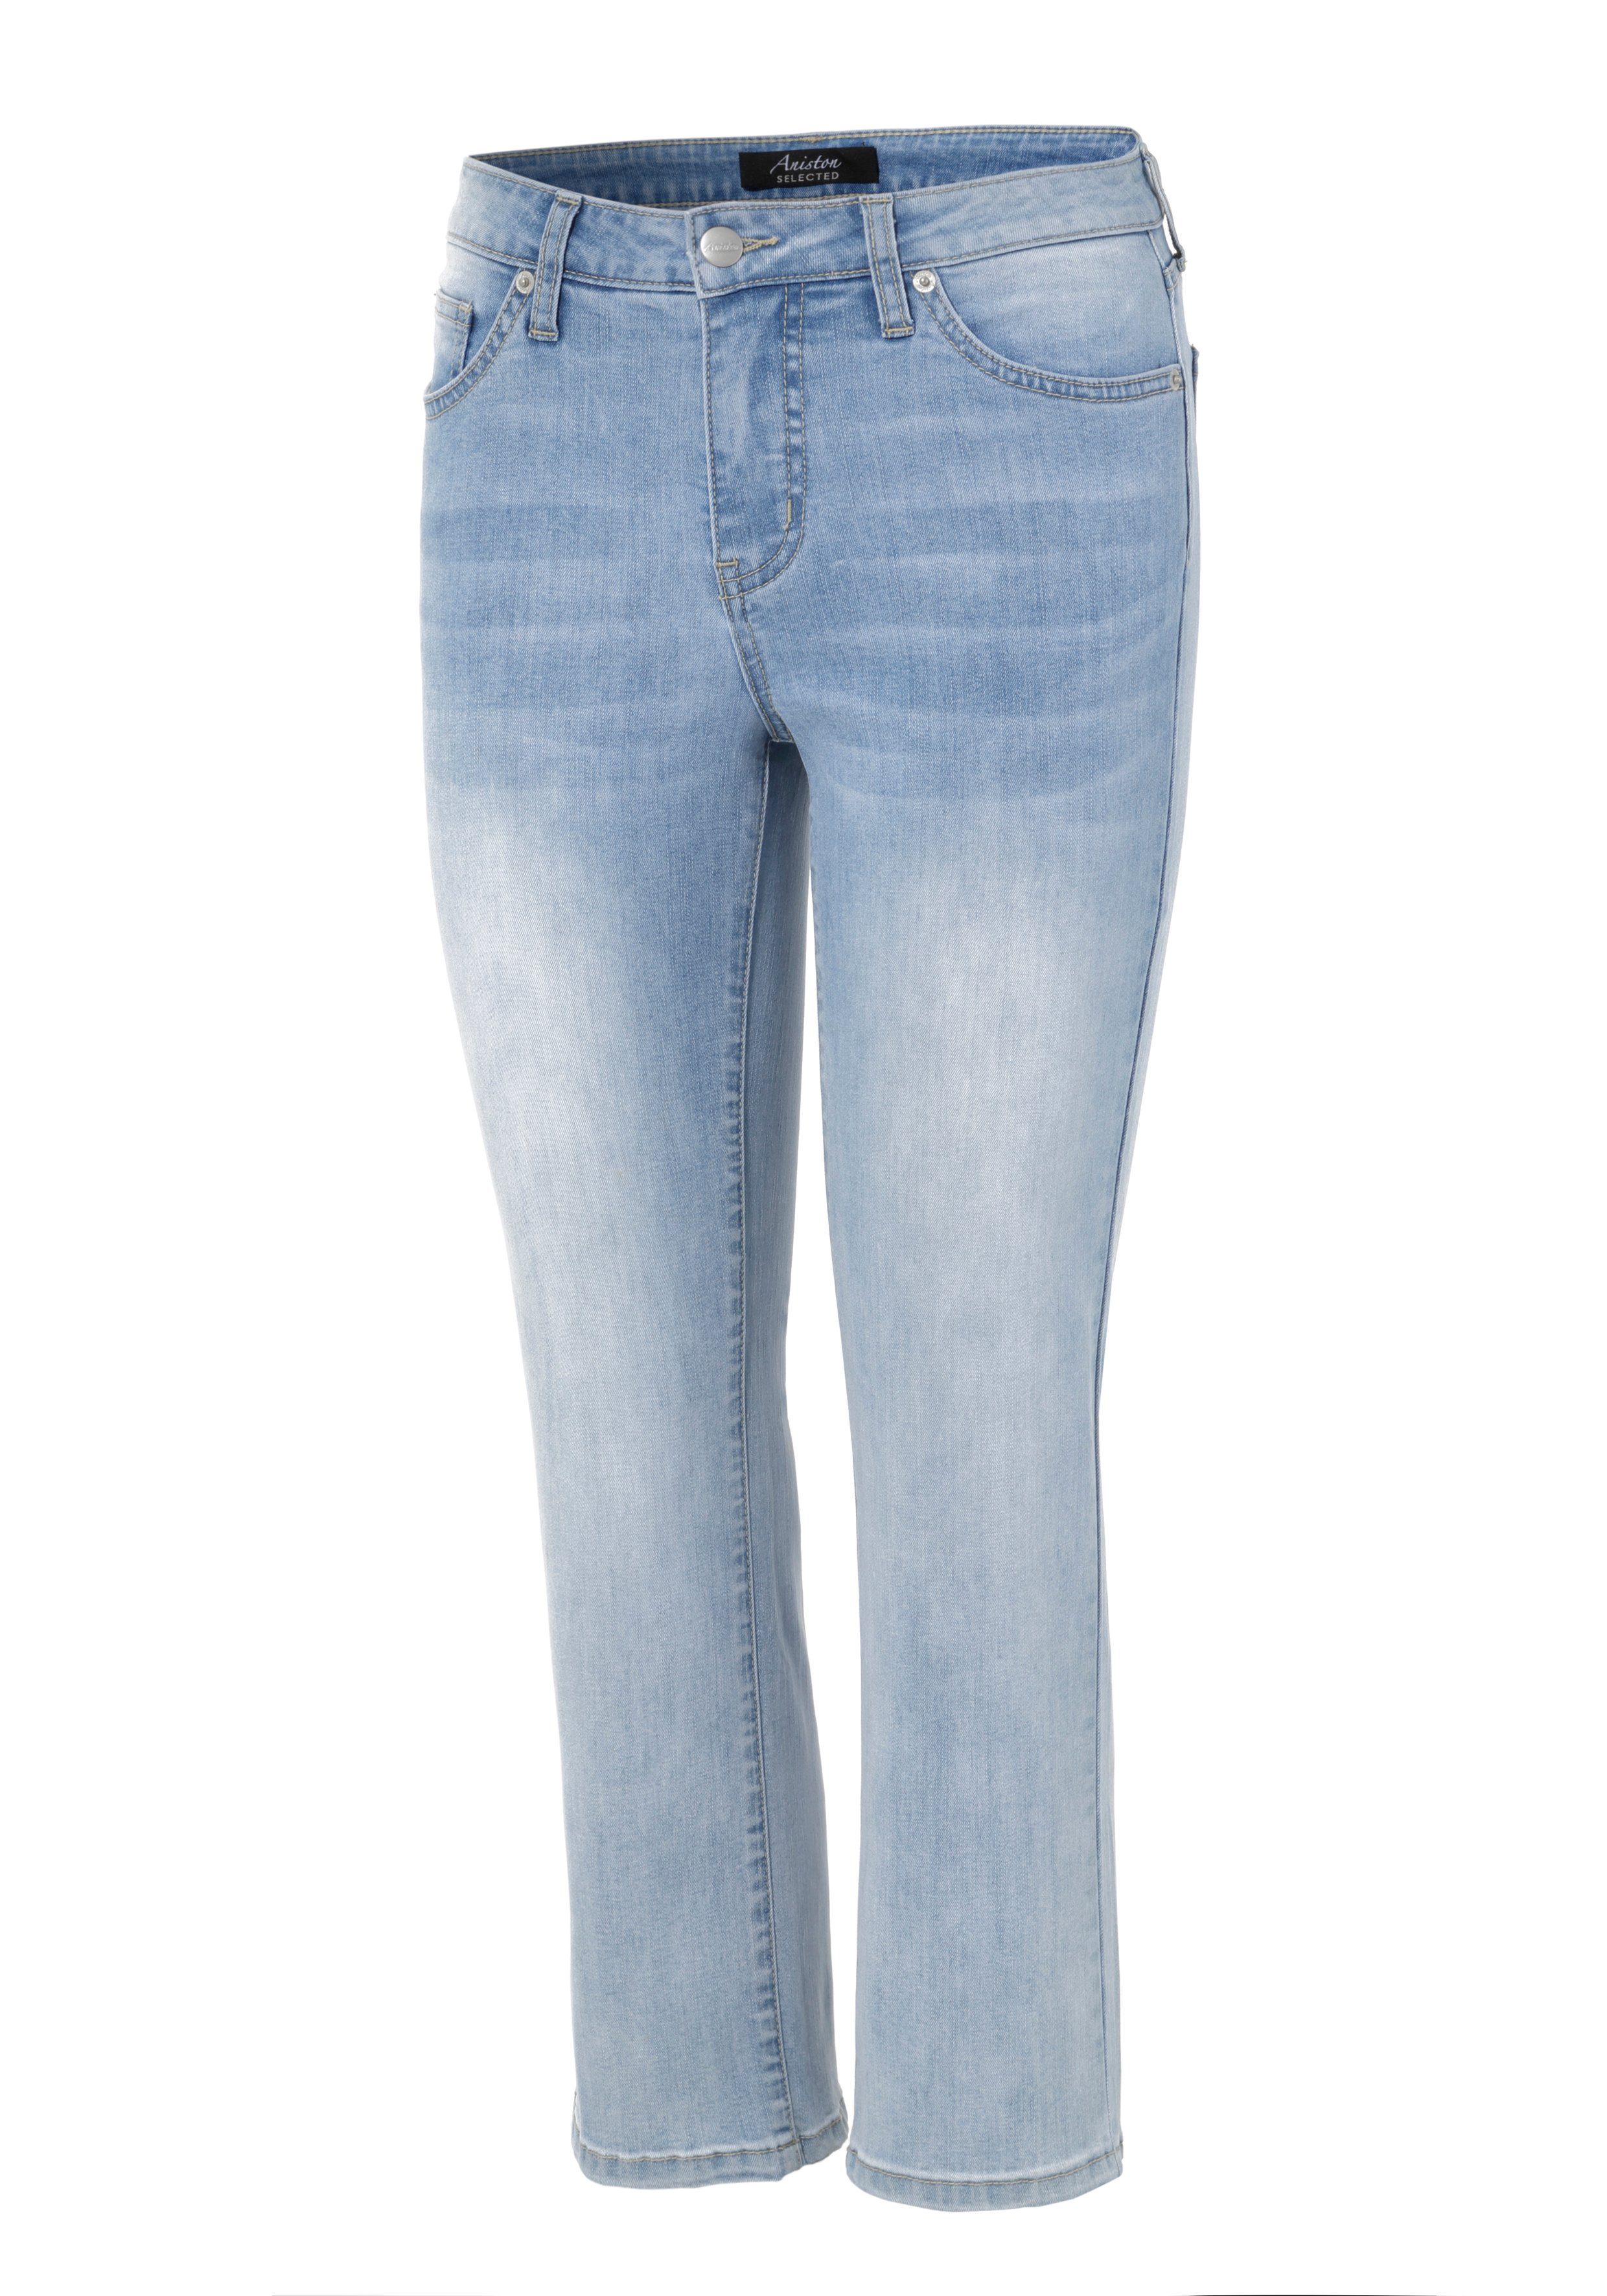 Aniston in SELECTED cropped light-blue-washed Länge verkürzter Straight-Jeans